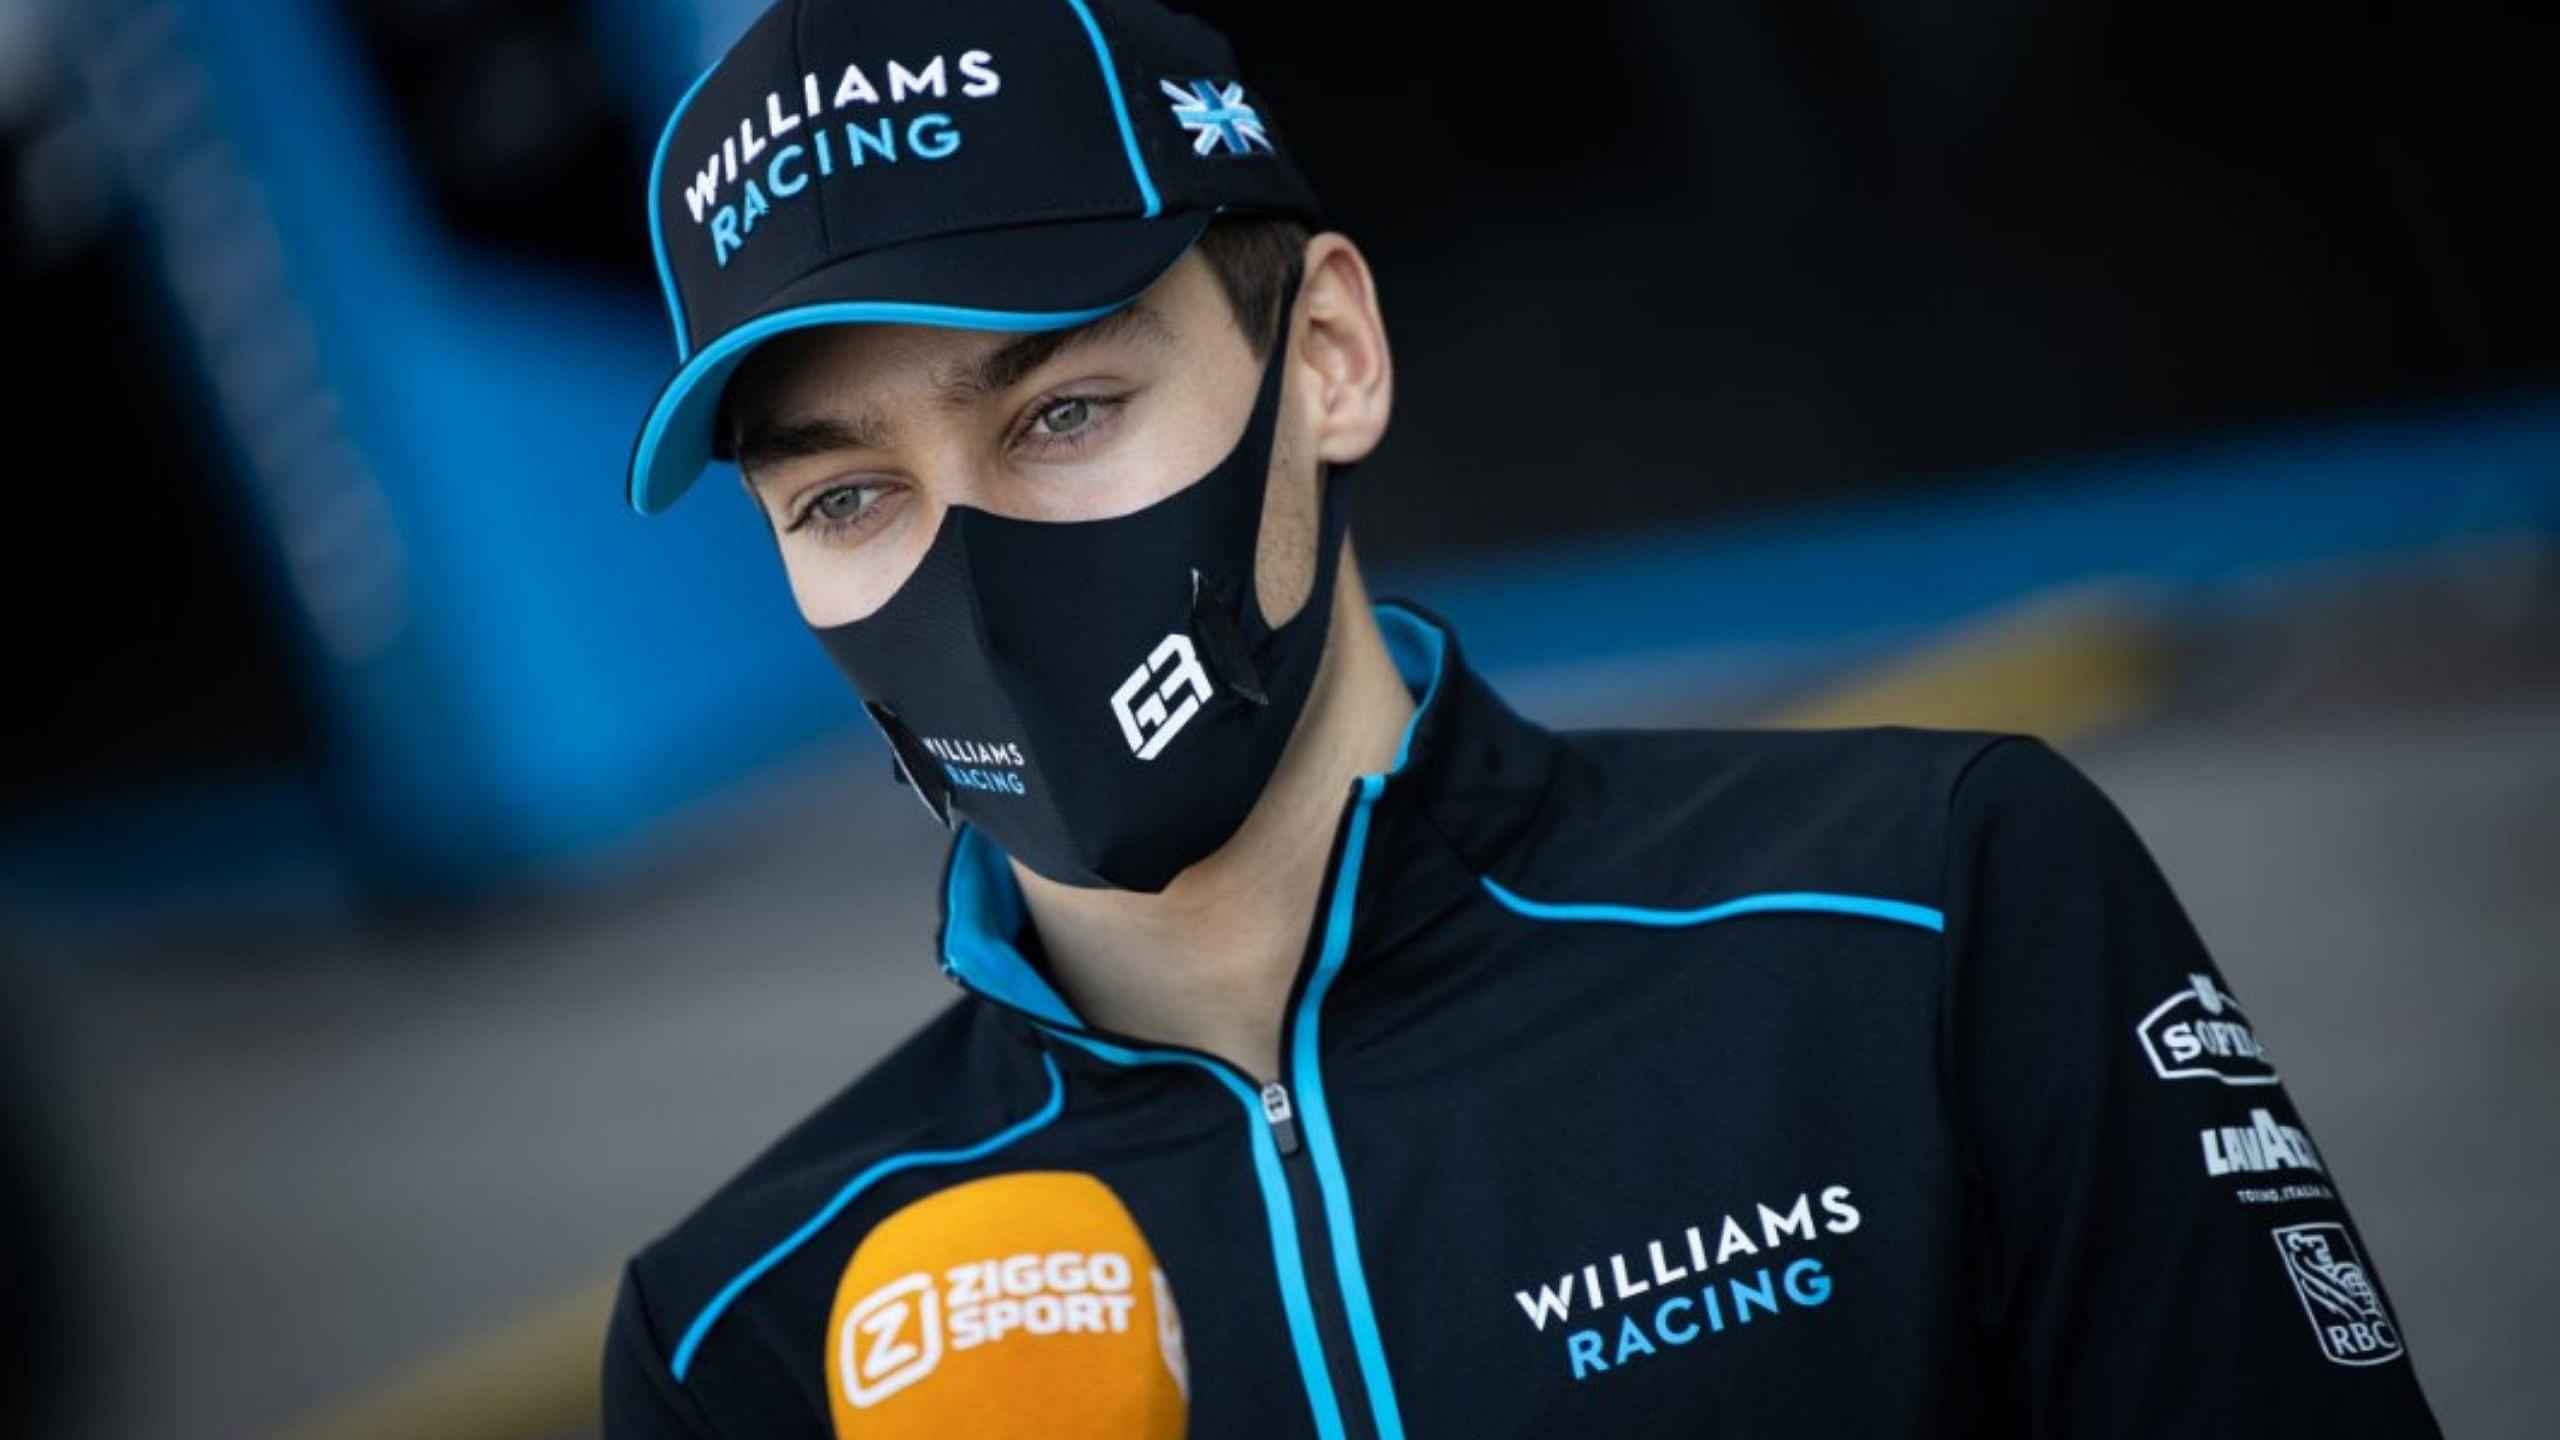 "George is pretty highly rated for the future" - Mercedes boss Toto Wolff has his say on George Russell replacing Valtteri Bottas